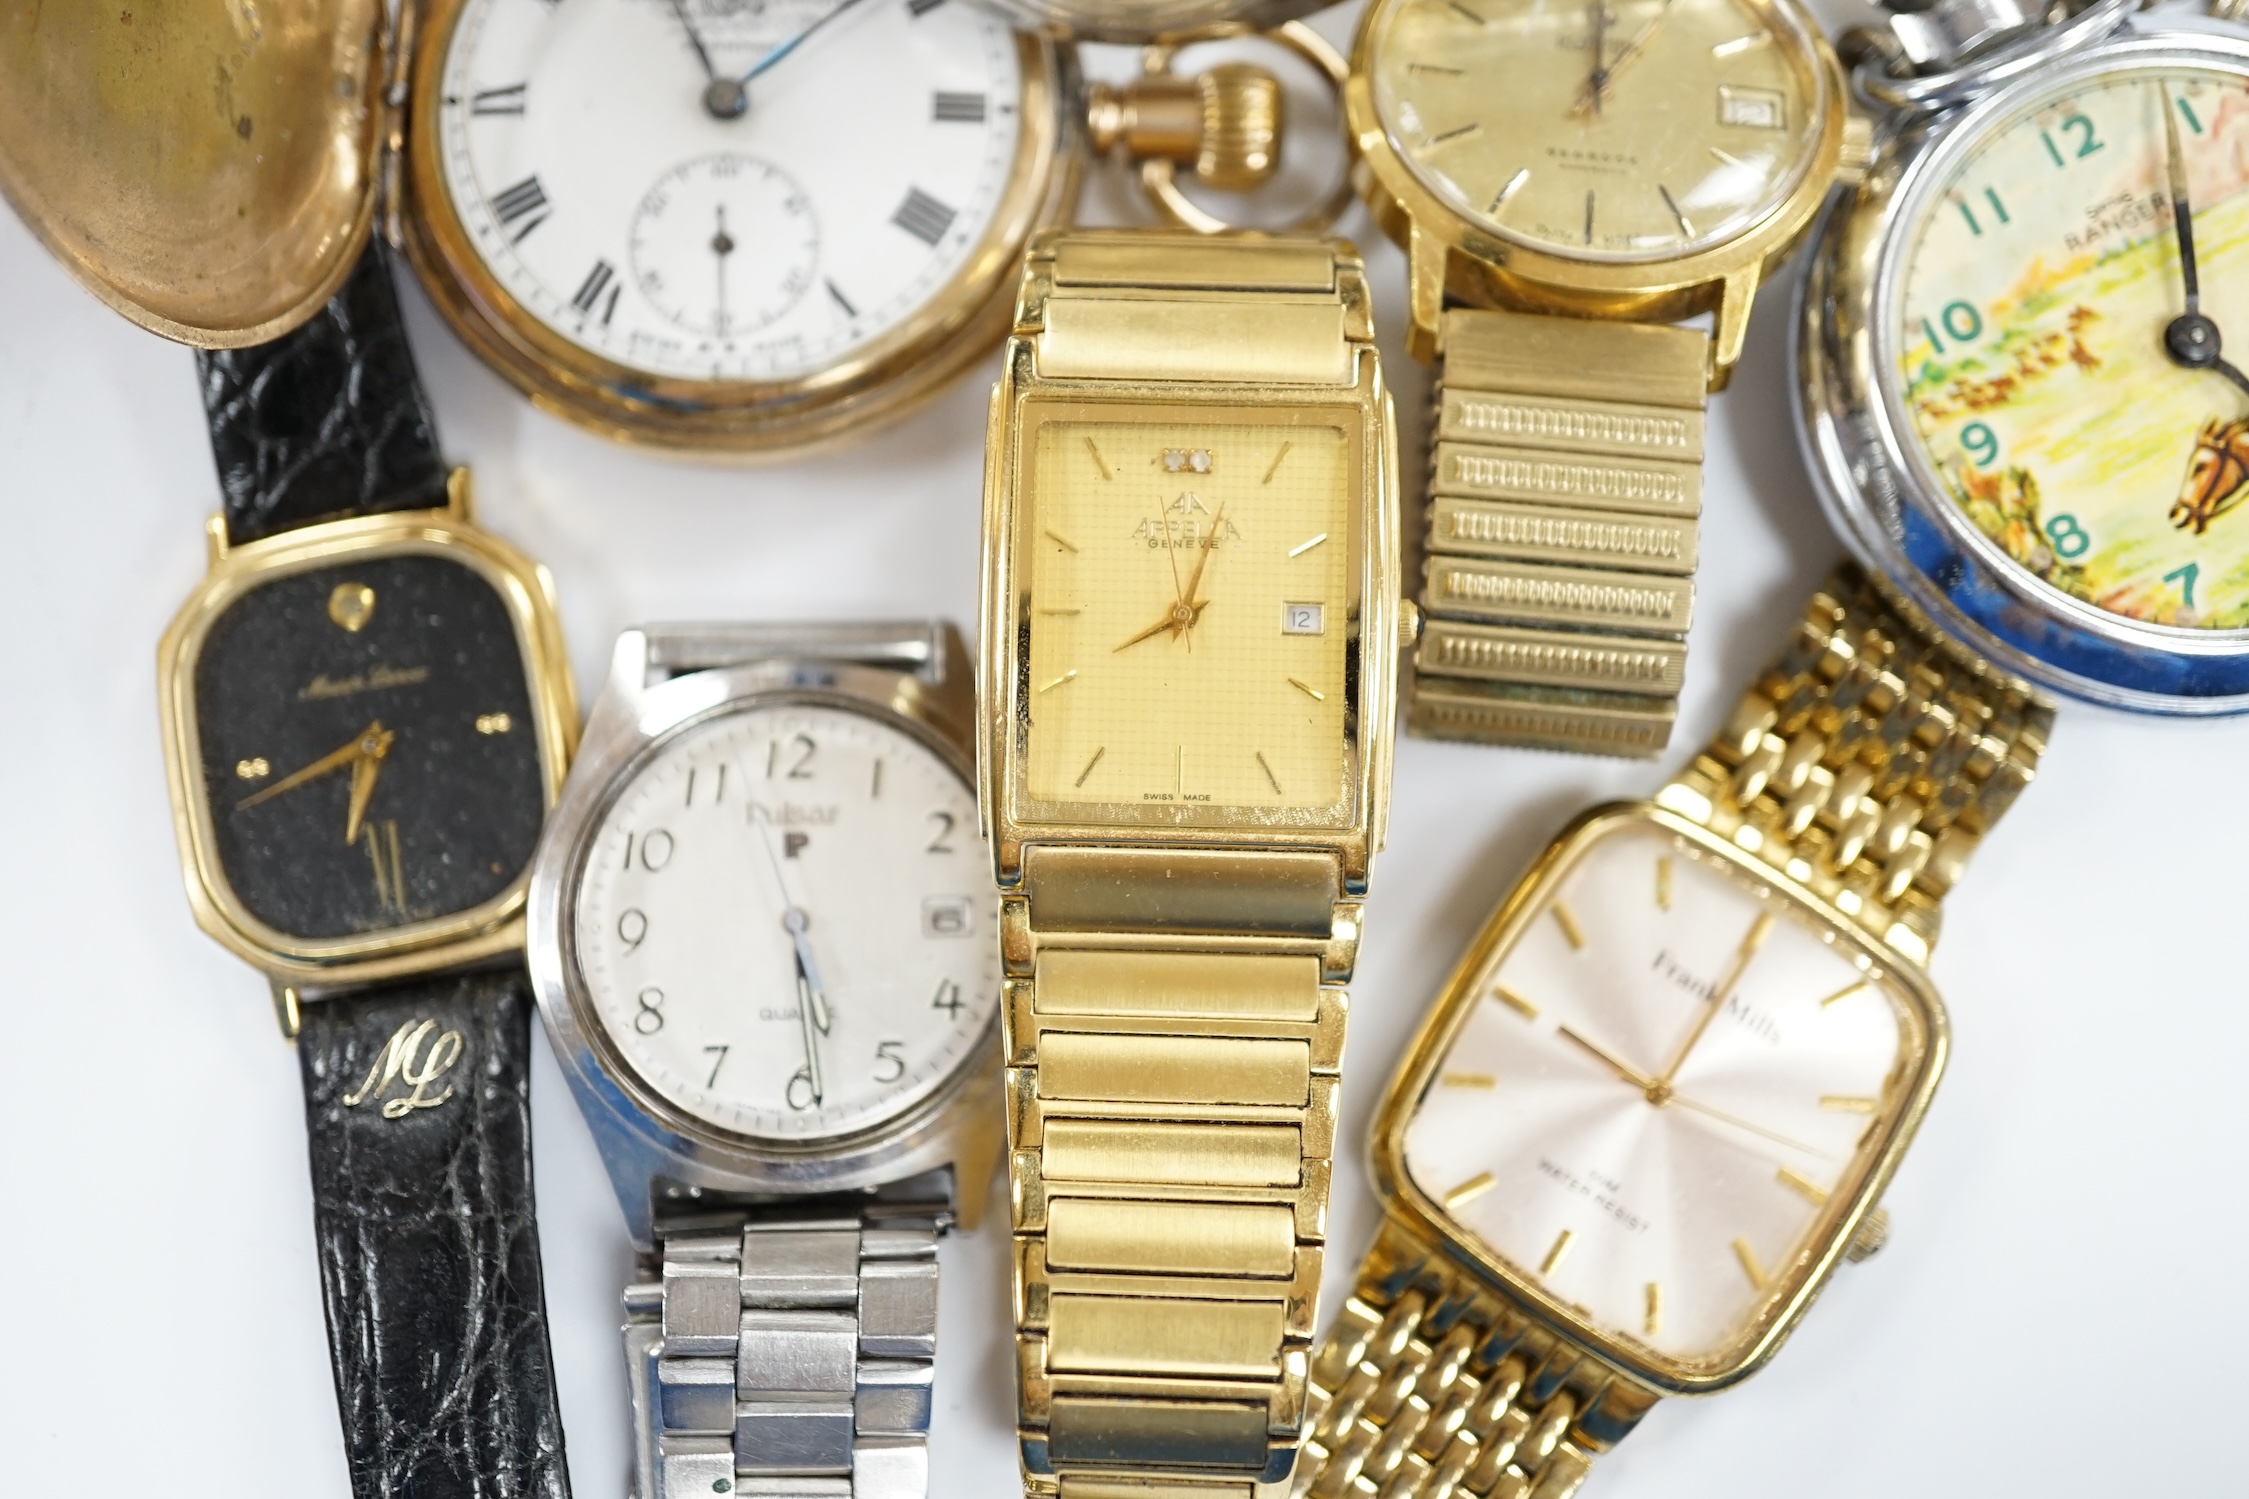 A small group of assorted wrist and pocket watches including a gold plated hunter and a Roamer Searock.